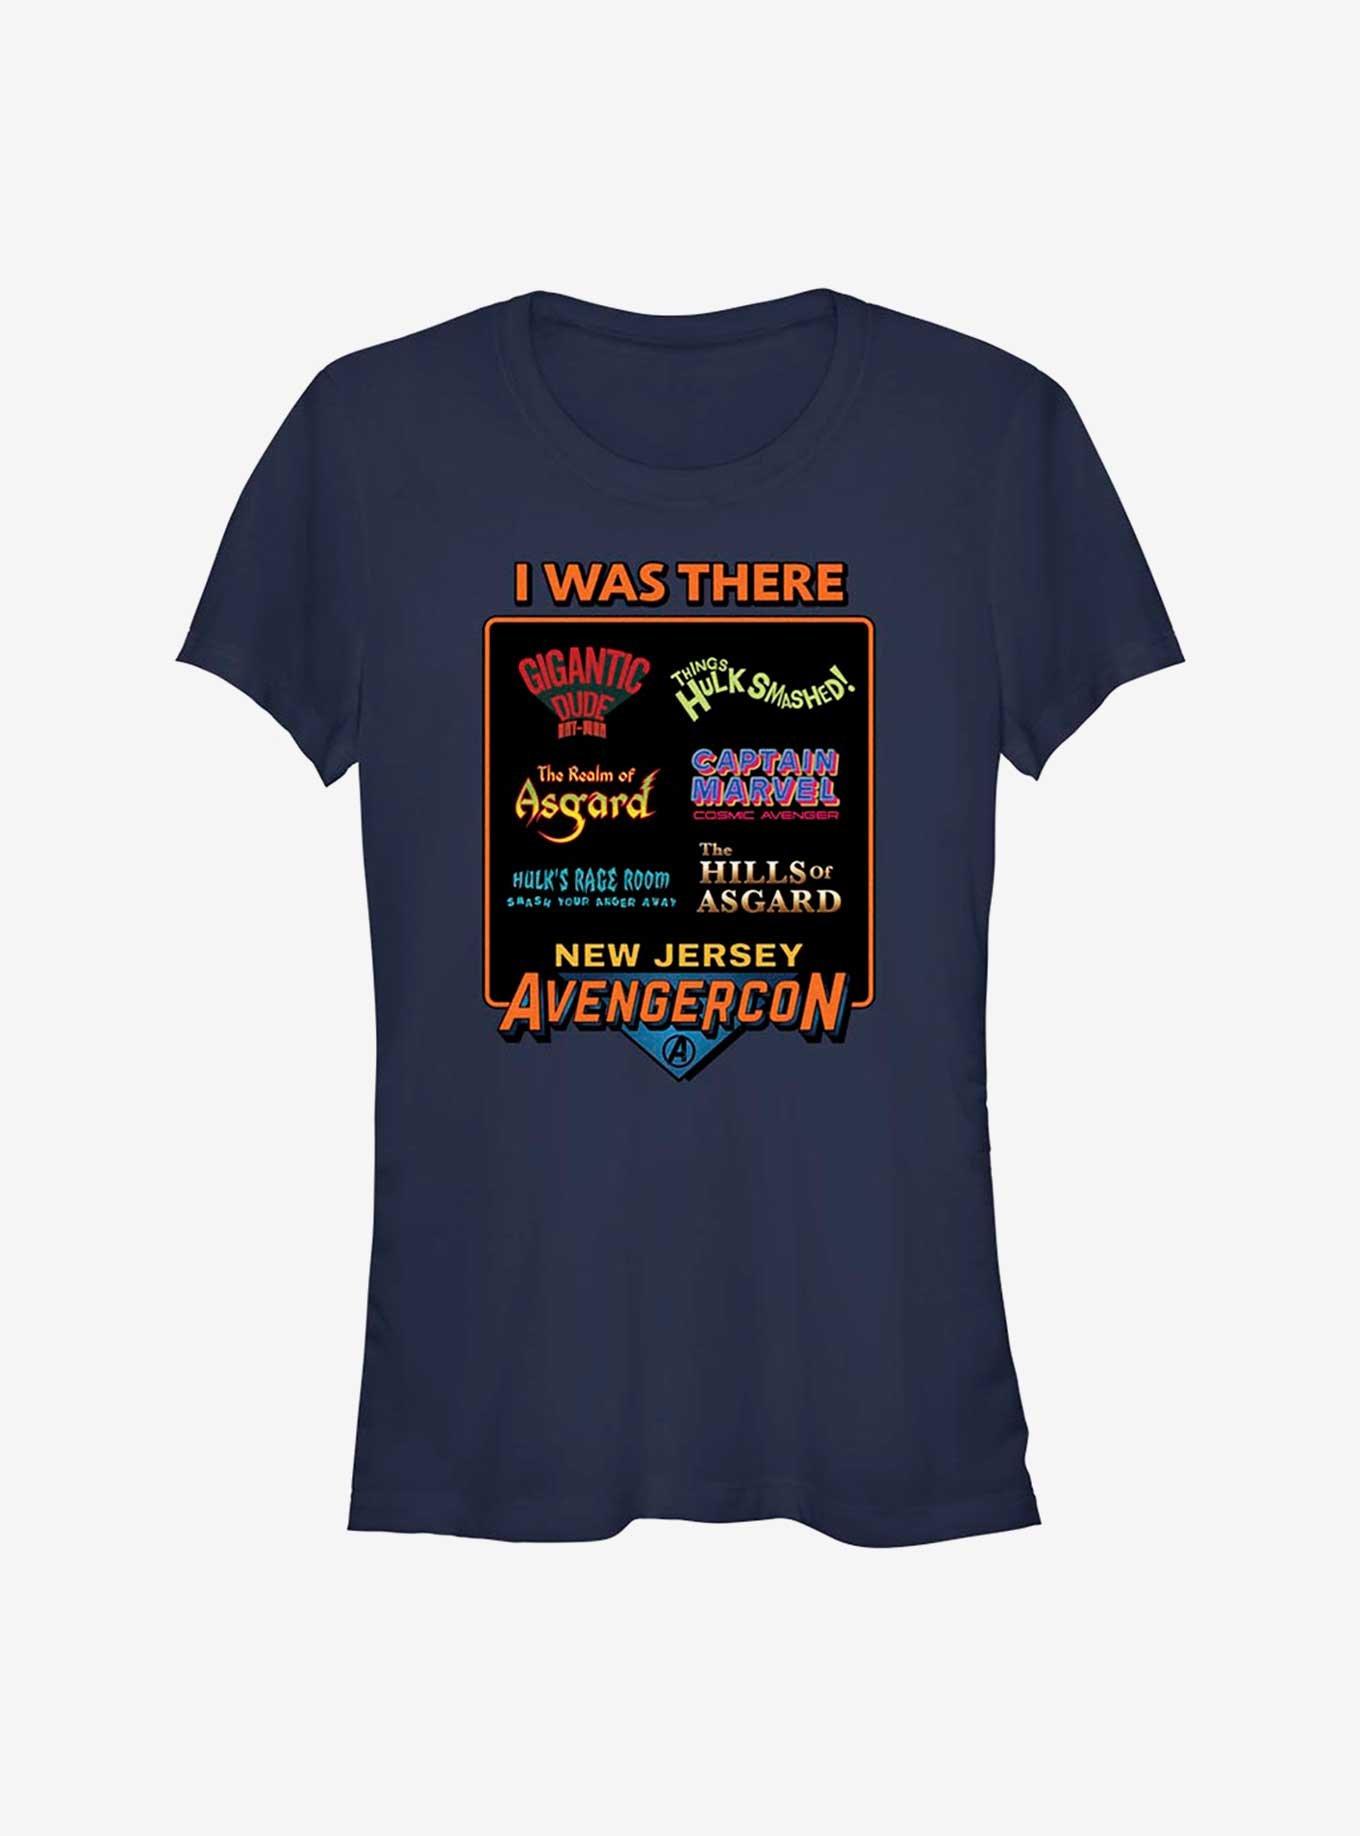 Marvel Ms. Marvel Avengerscon I Was There Girls T-Shirt, NAVY, hi-res